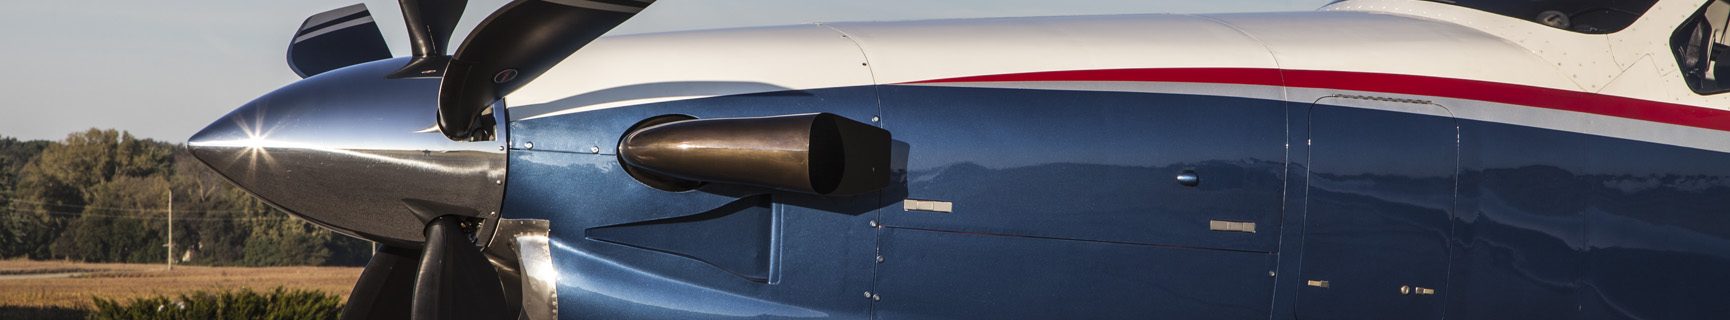 Side view of TBM aircraft with 5-blade Hartzell propeller